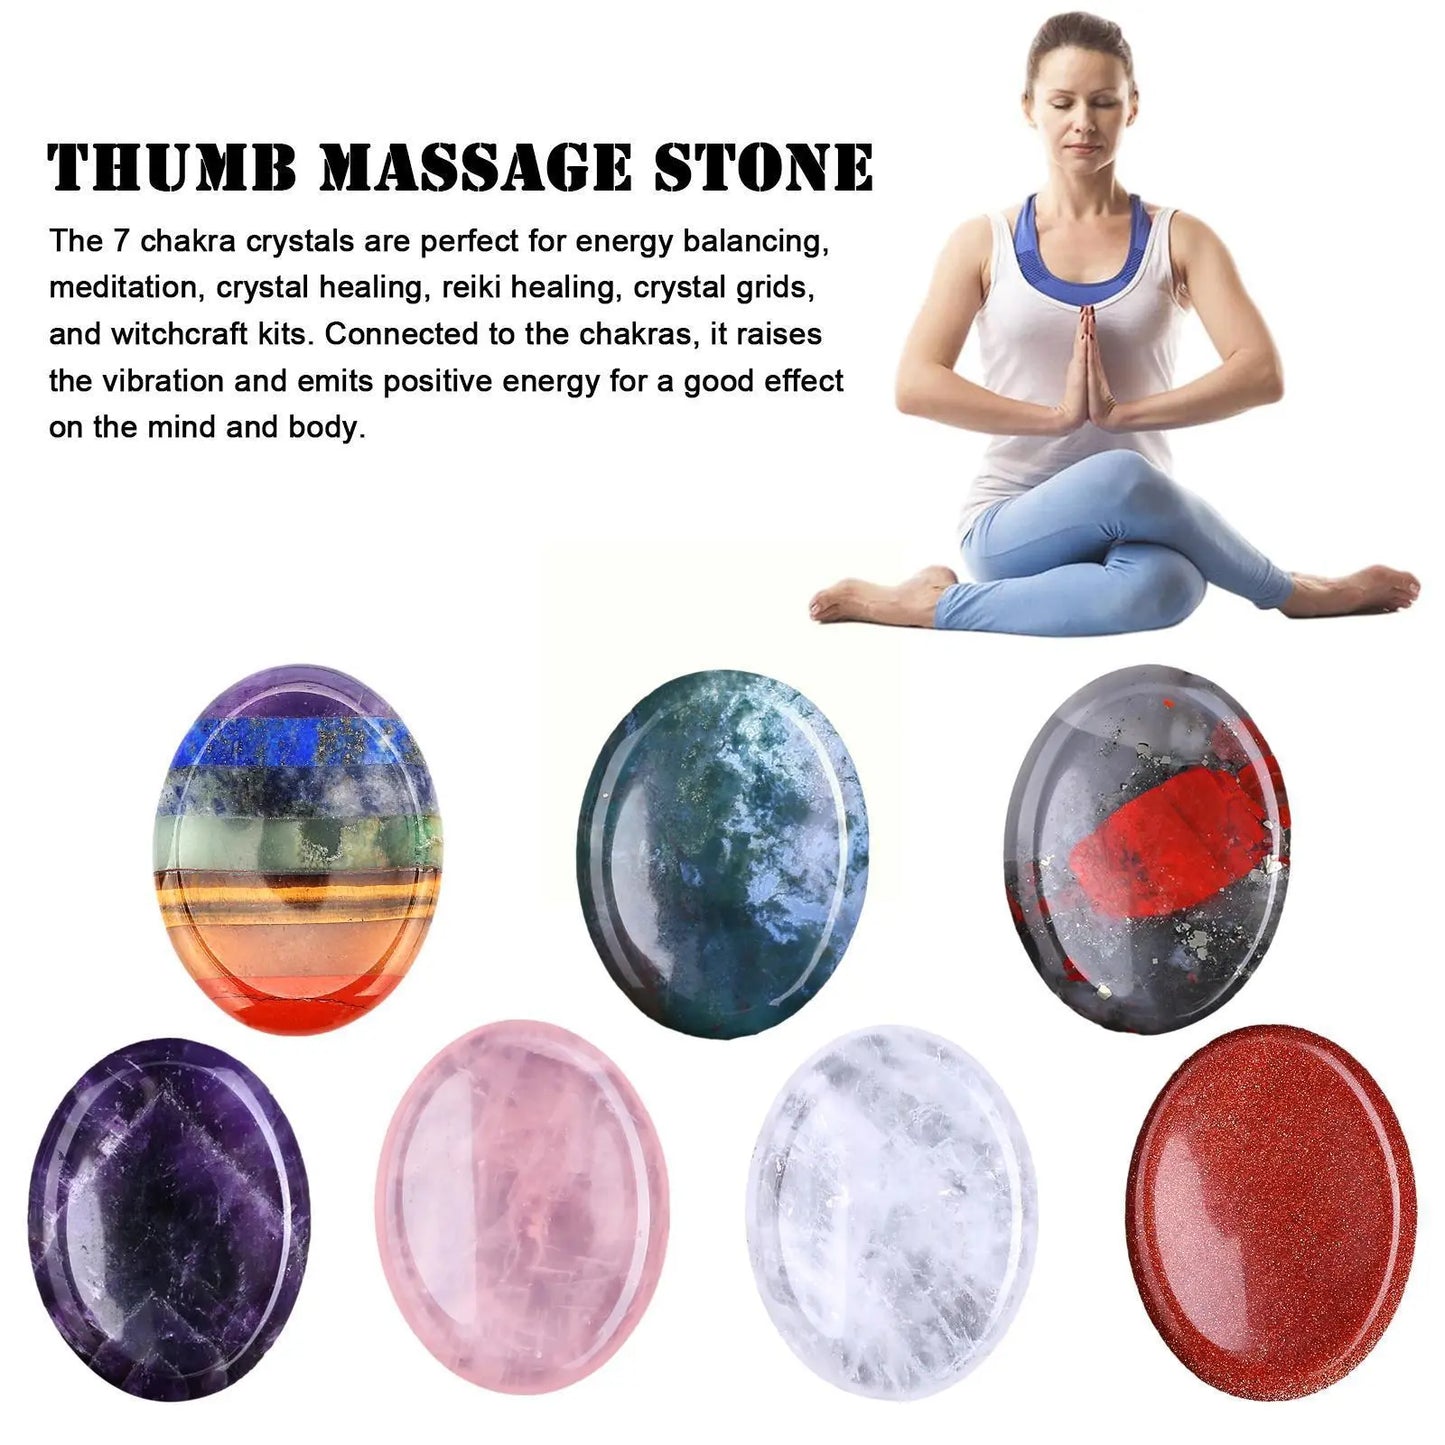 Thumb Worry Stone Chakra Worry Stone For Healing Rainbow Crystals And Healing Rocks Natural Crystal Gems Anxiety Relief Dec C7x0